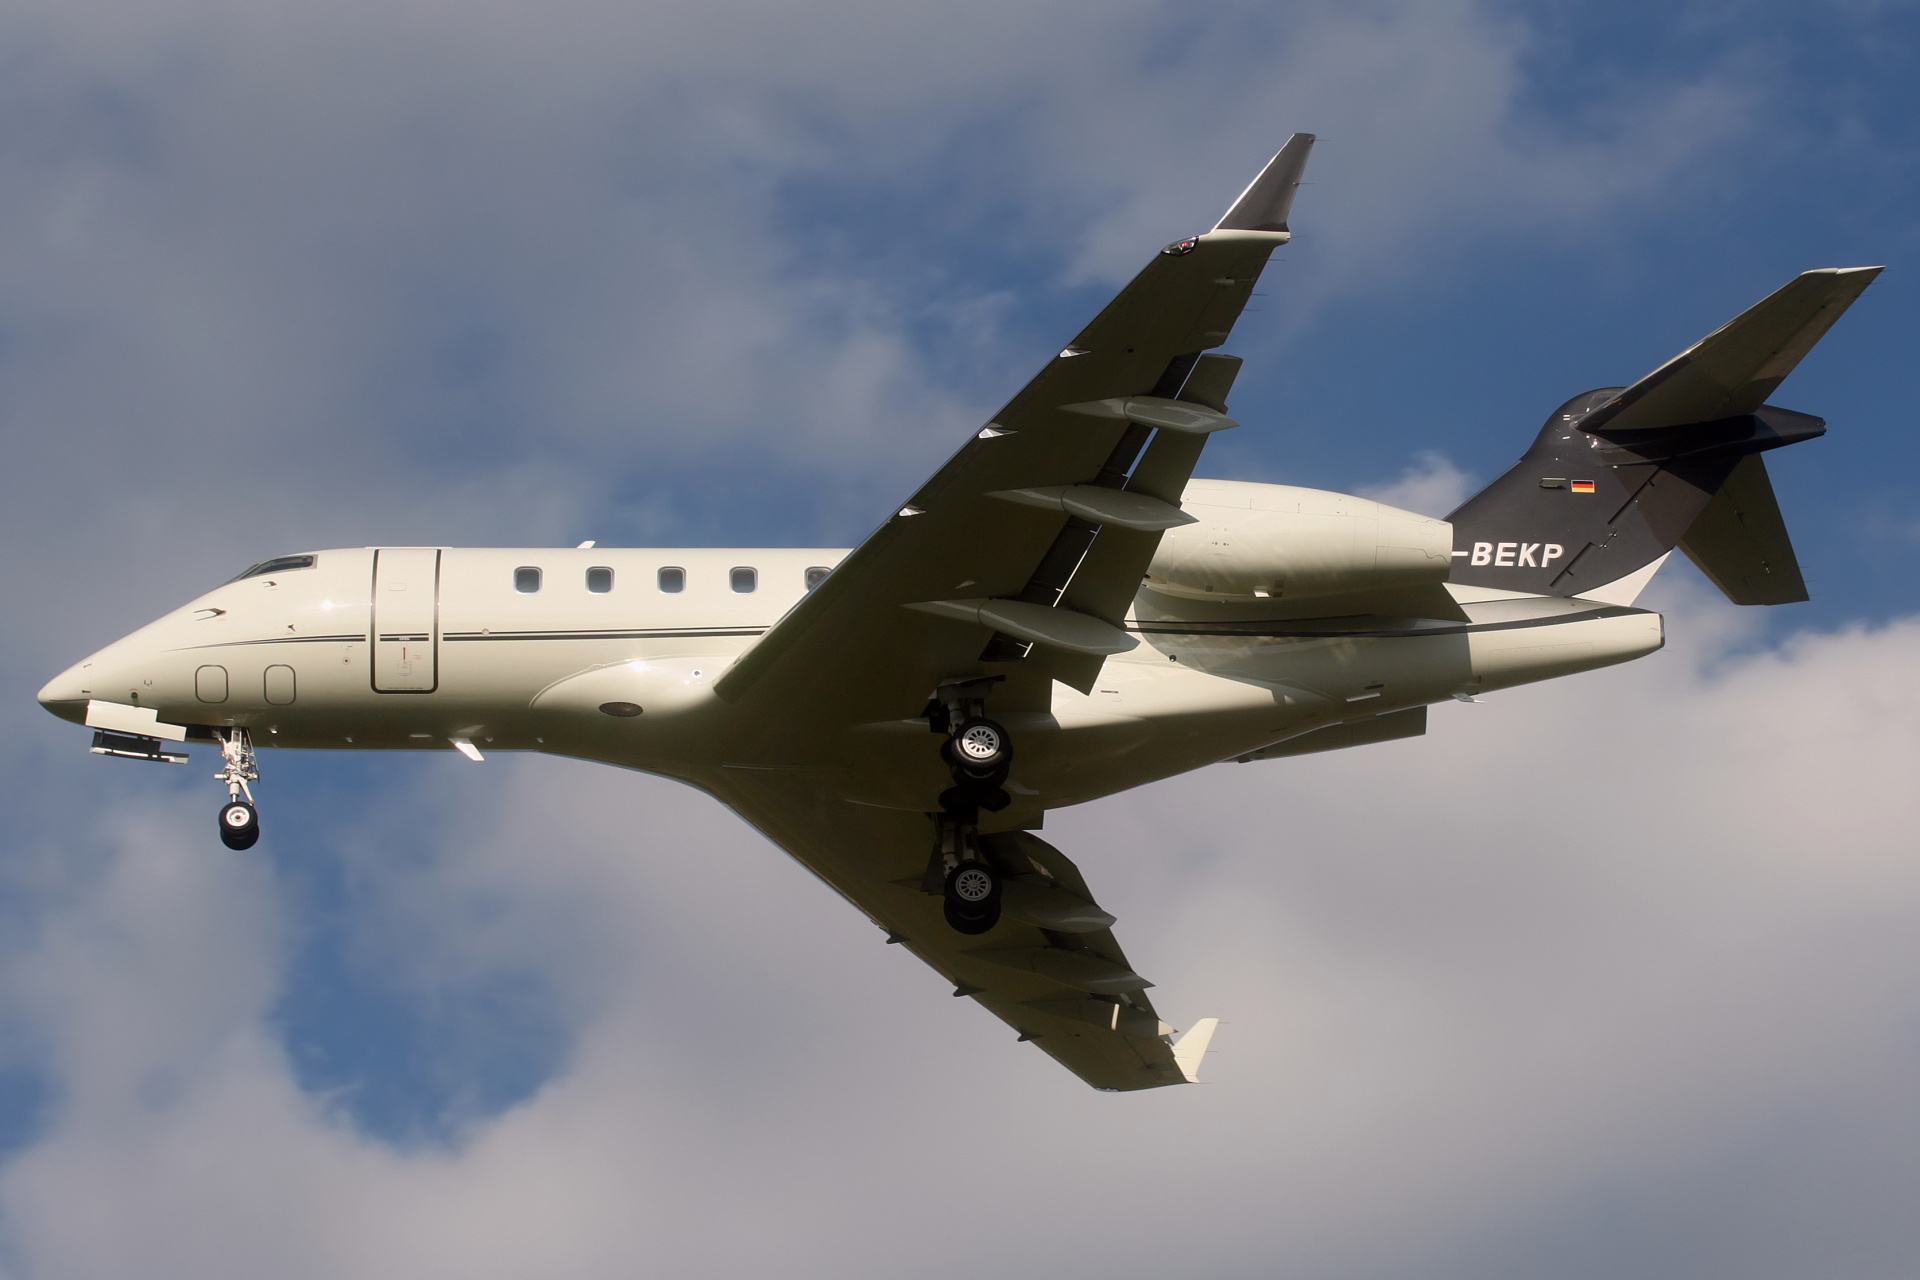 D-BEKP, Windrose Air Jetcharter (Aircraft » EPWA Spotting » Bombardier BD-100 Challenger 300)